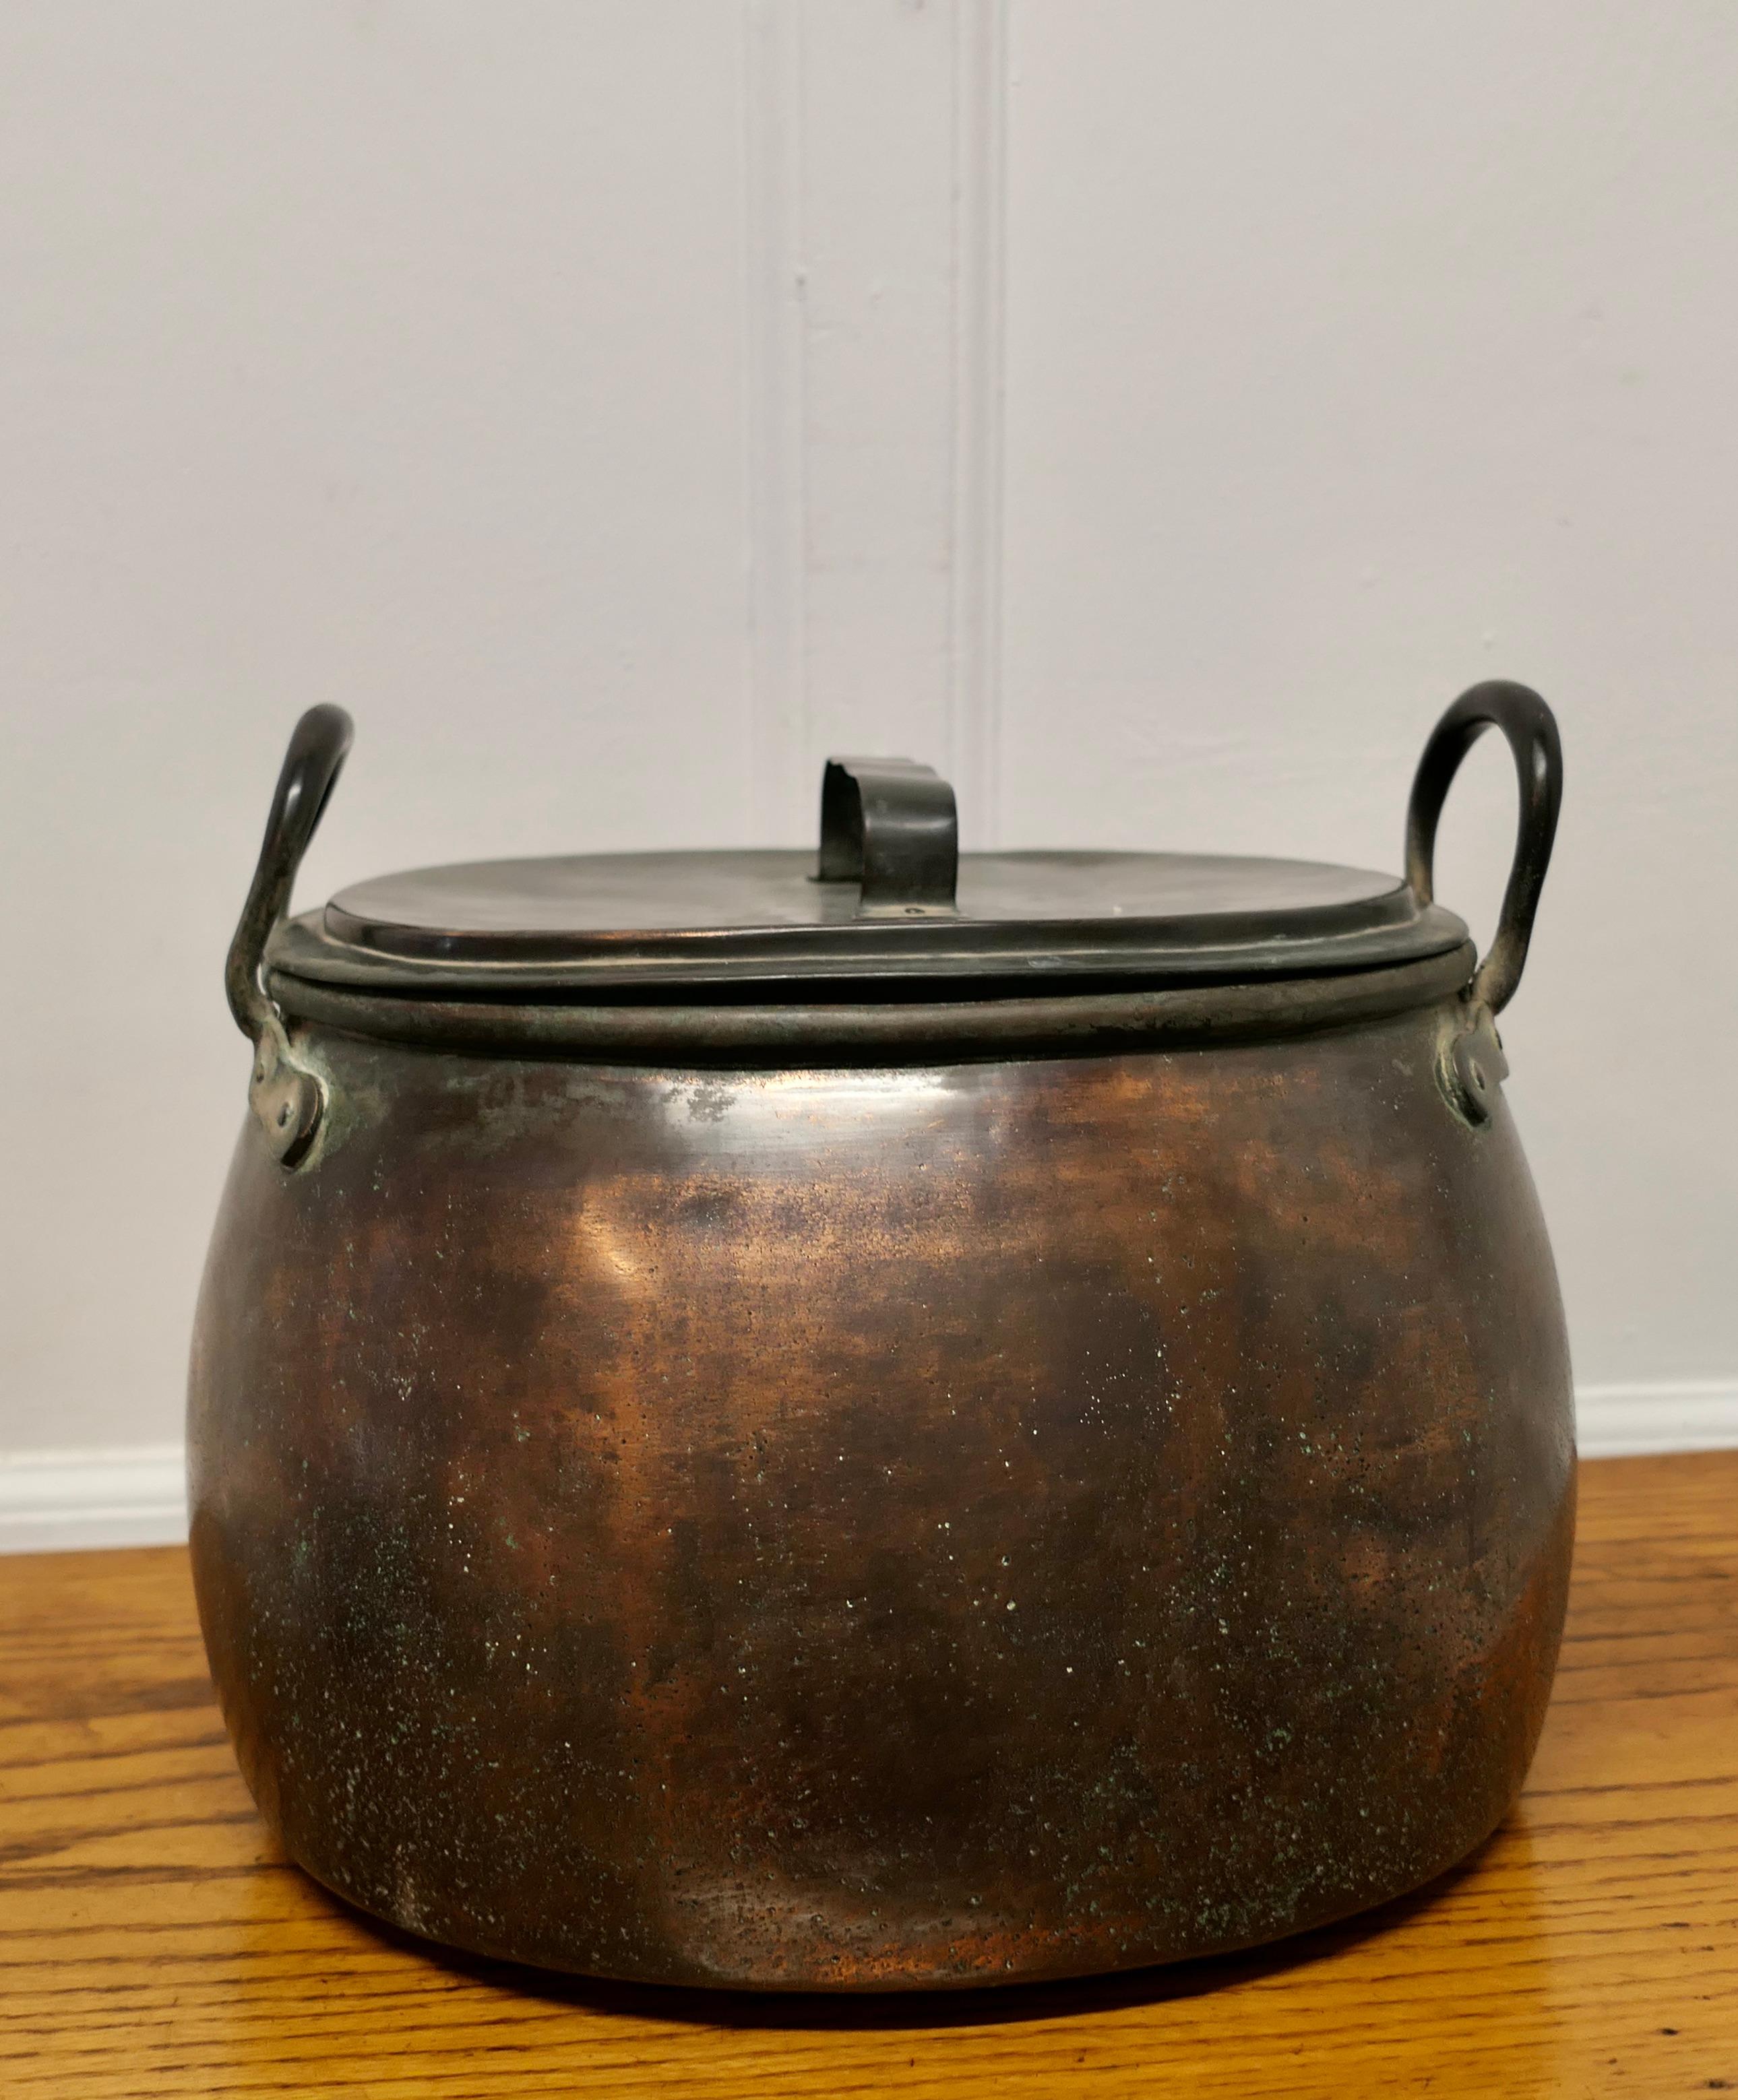 19th Century Copper Cooking Pot, Cauldron with Lid  

This is a lovely looking and very rare find, a 19th Century cooking pot, this piece is totally original just as though it came straight from the fire
The lid fits tightly and there are no holes